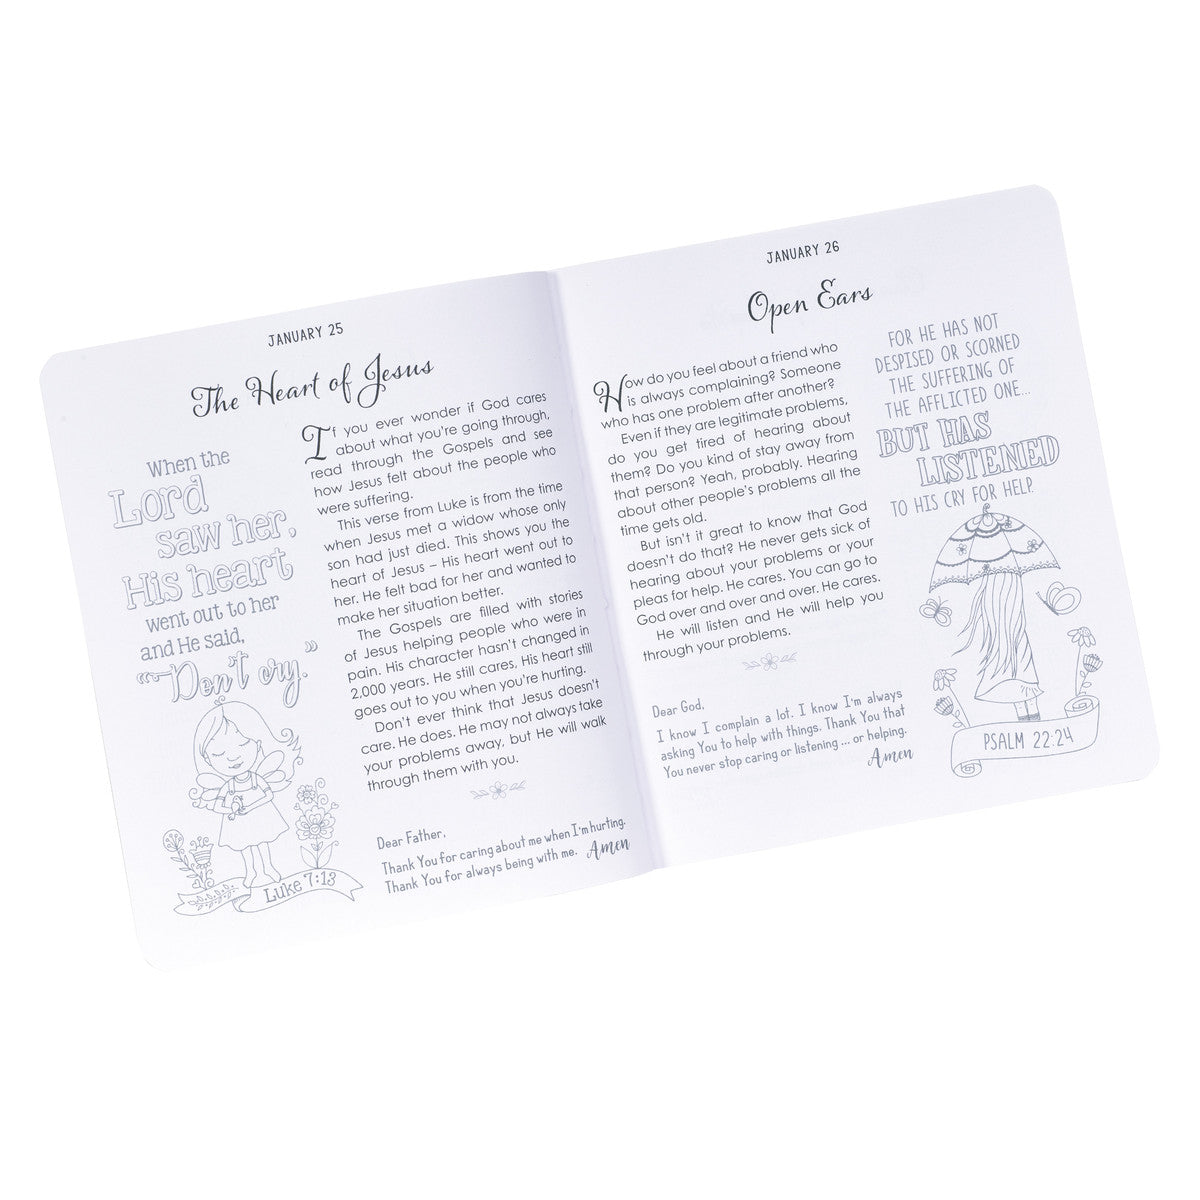 The Illustrated Devotional For Girls